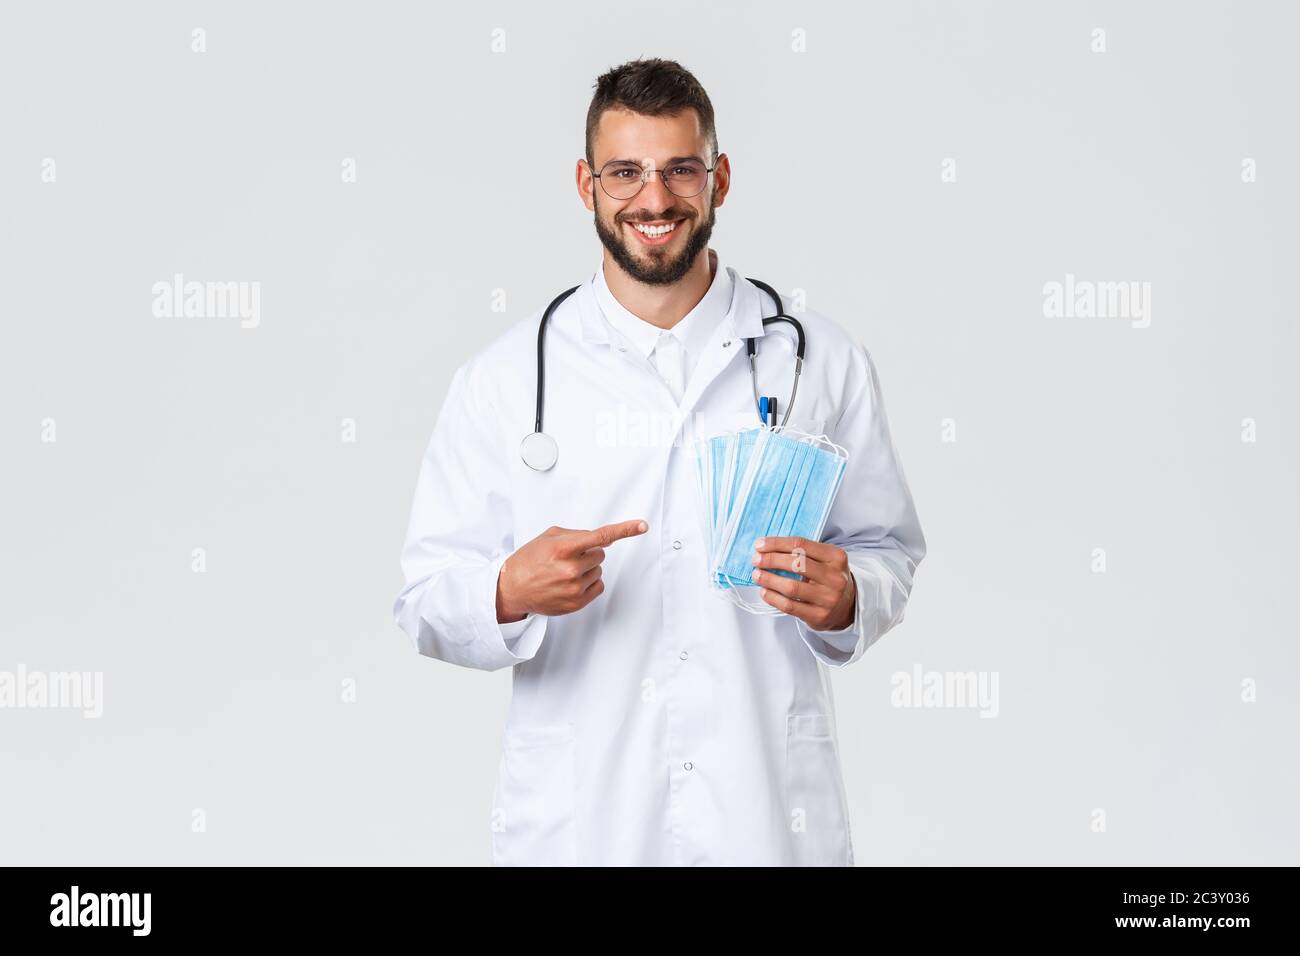 Healthcare workers, medical insurance, pandemic and covid-19 concept. Cheerful, smiling handsome doctor recommend using medical masks, physician in Stock Photo